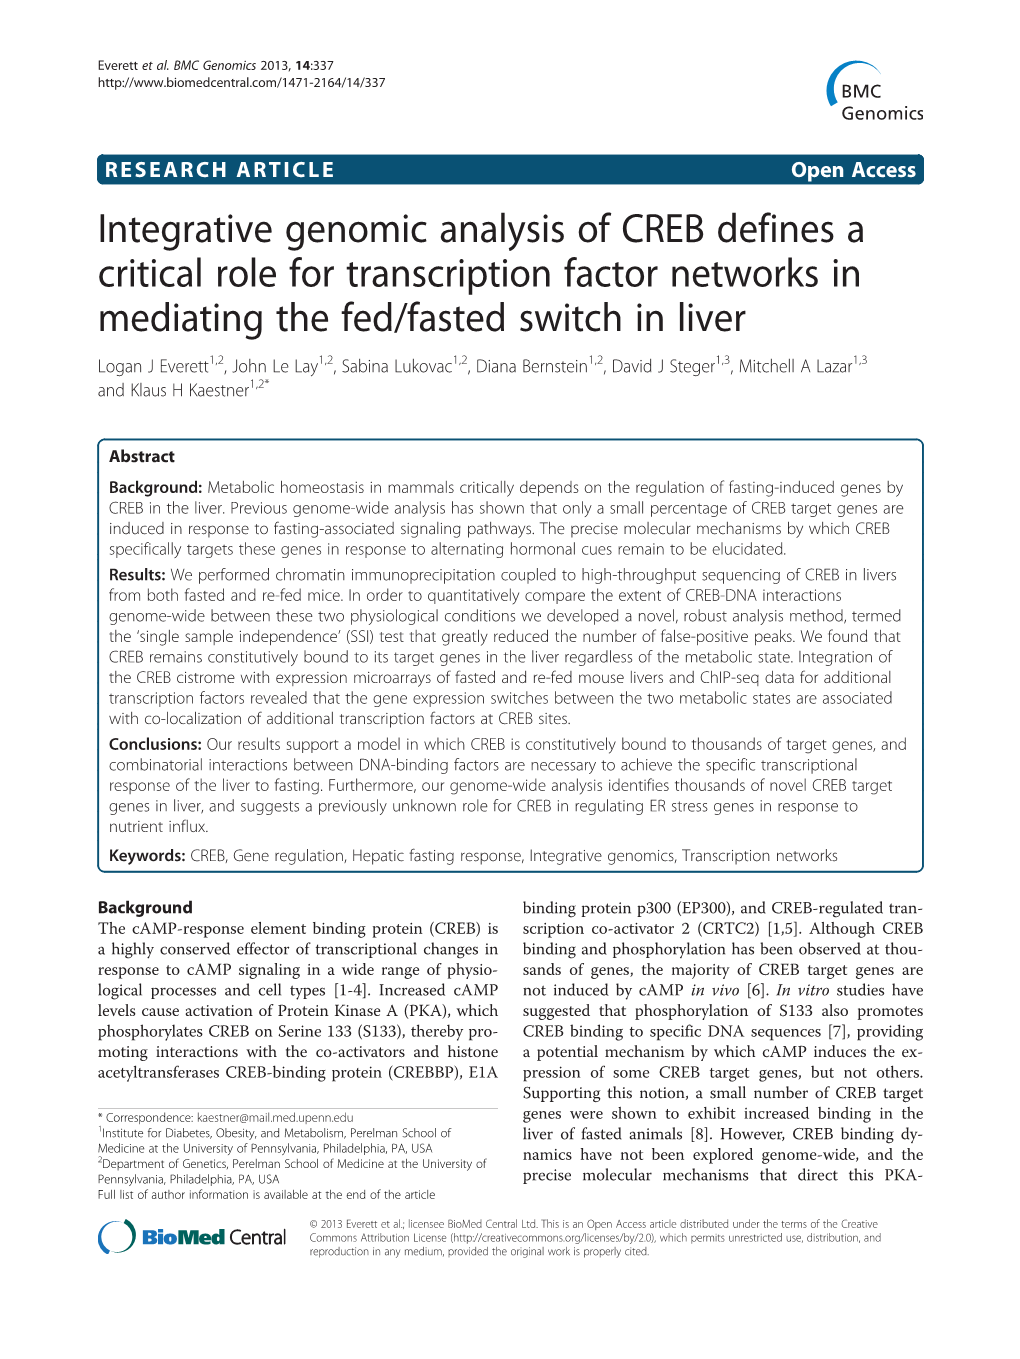 Integrative Genomic Analysis of CREB Defines a Critical Role For